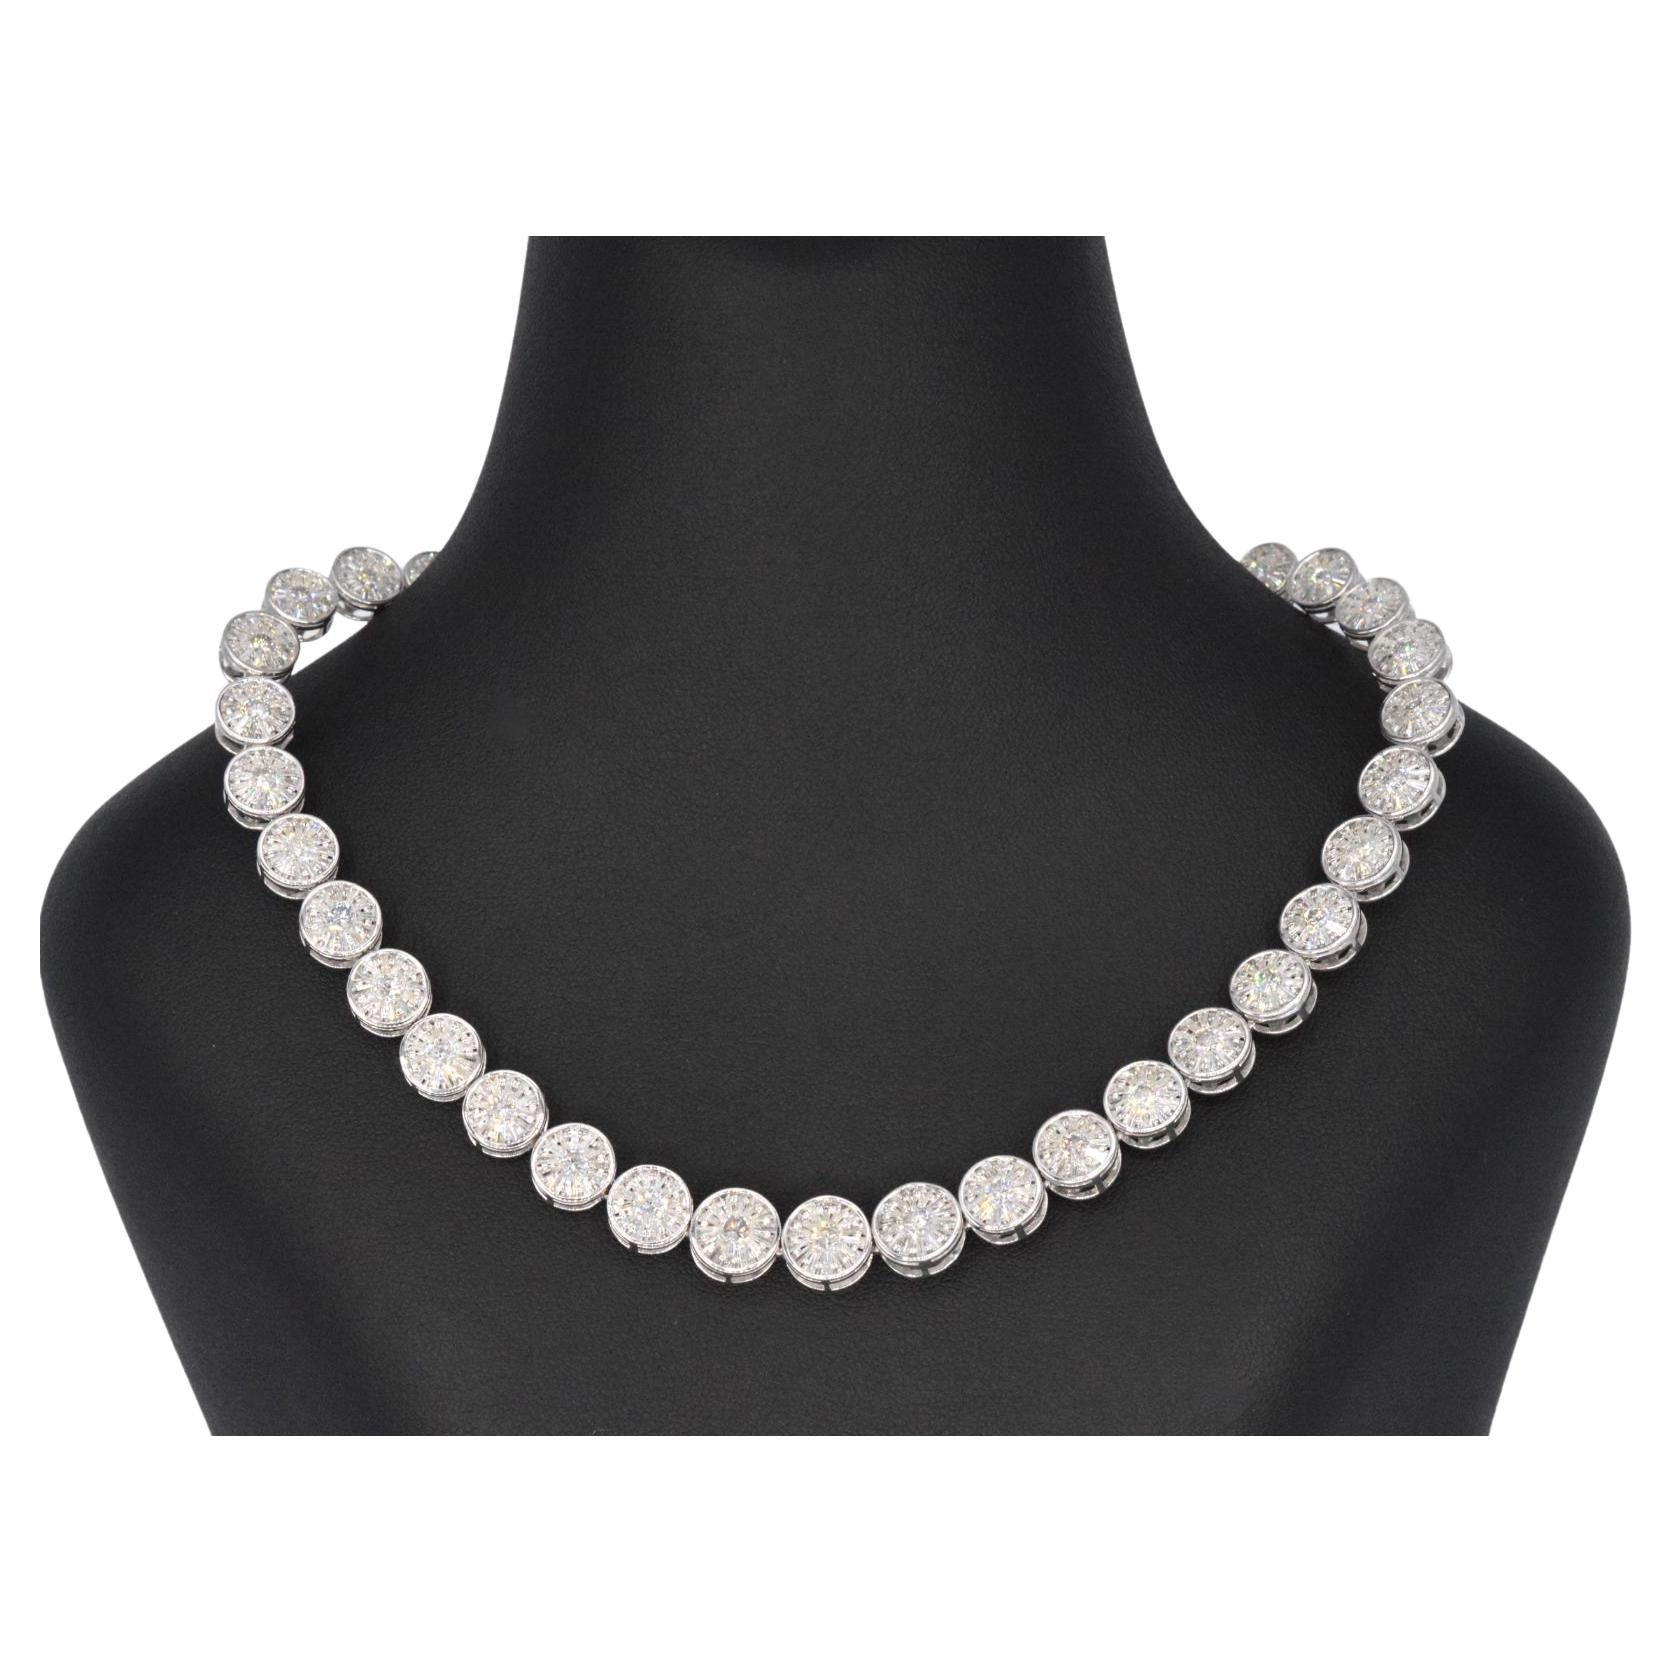 White Gold Necklace with 15.00 Carat Diamonds